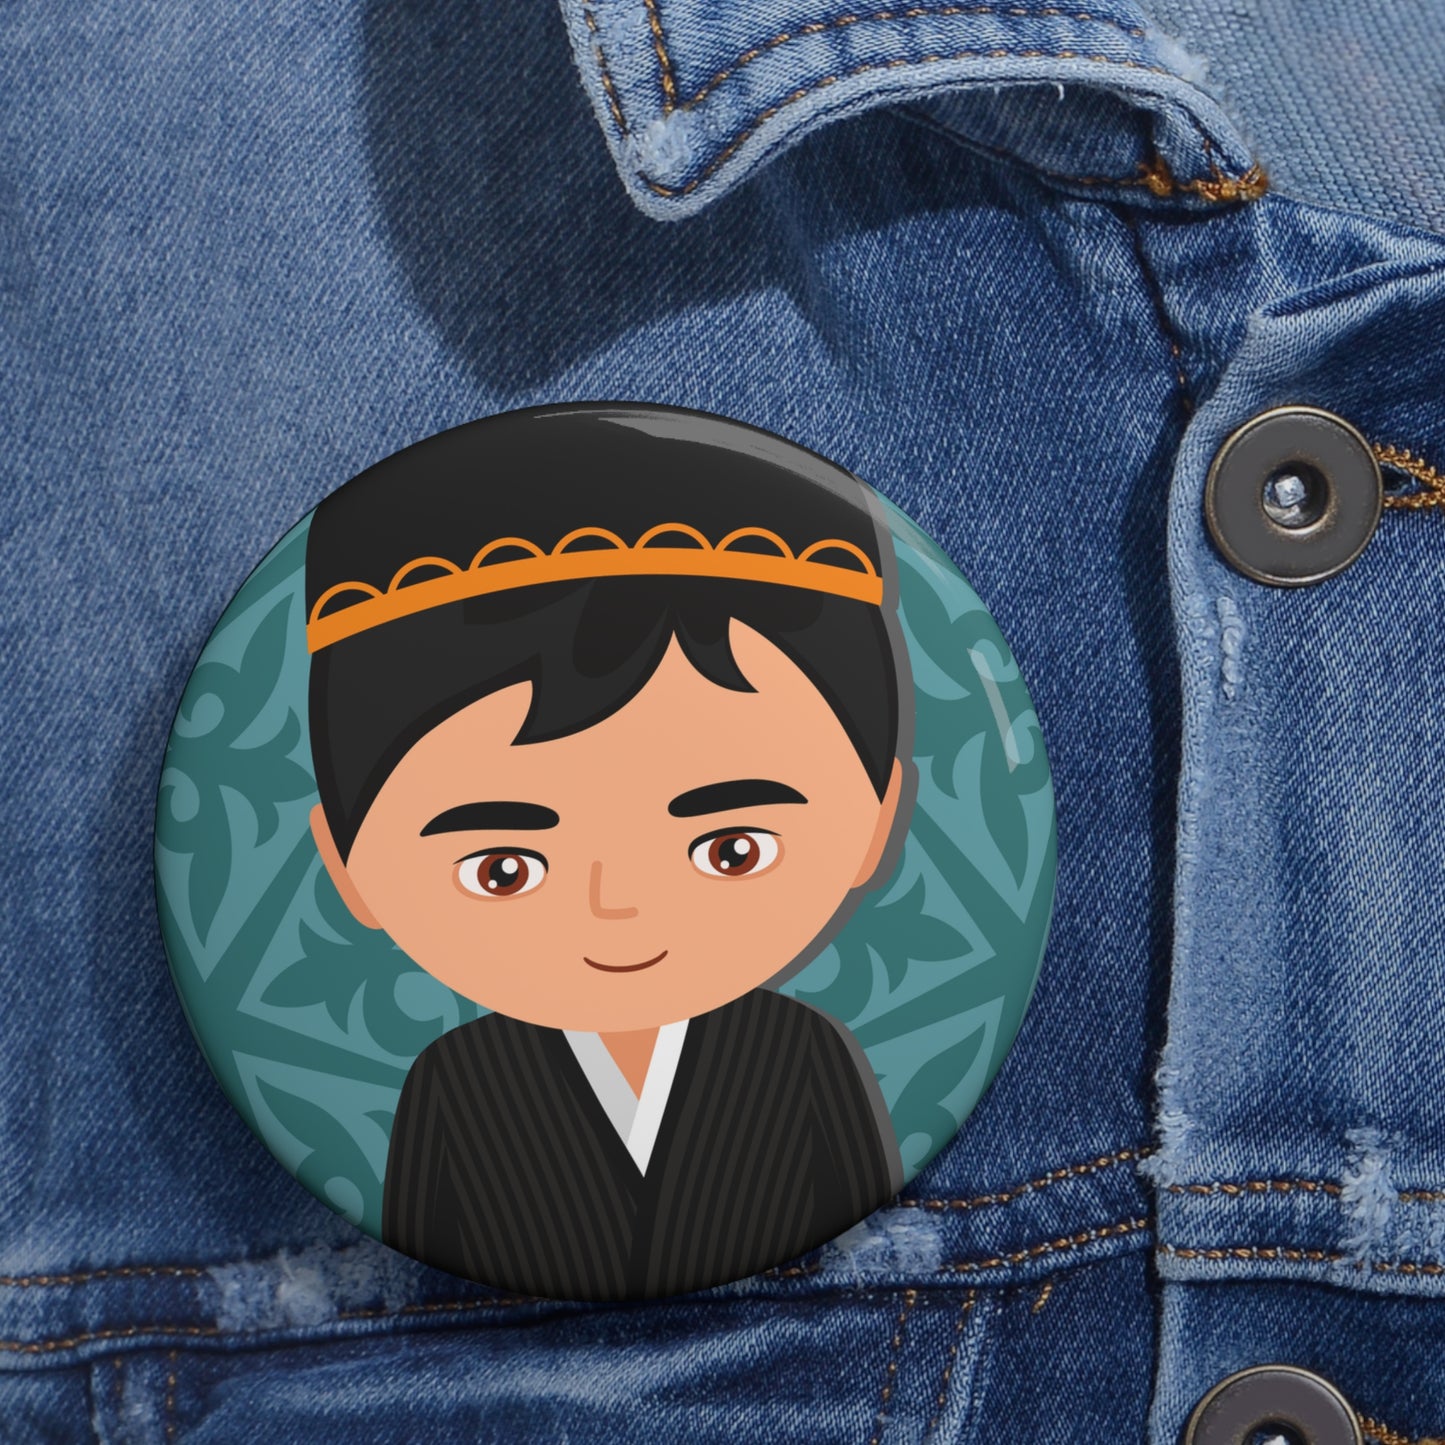 Tajik Men In traditional clothes Pin Buttons